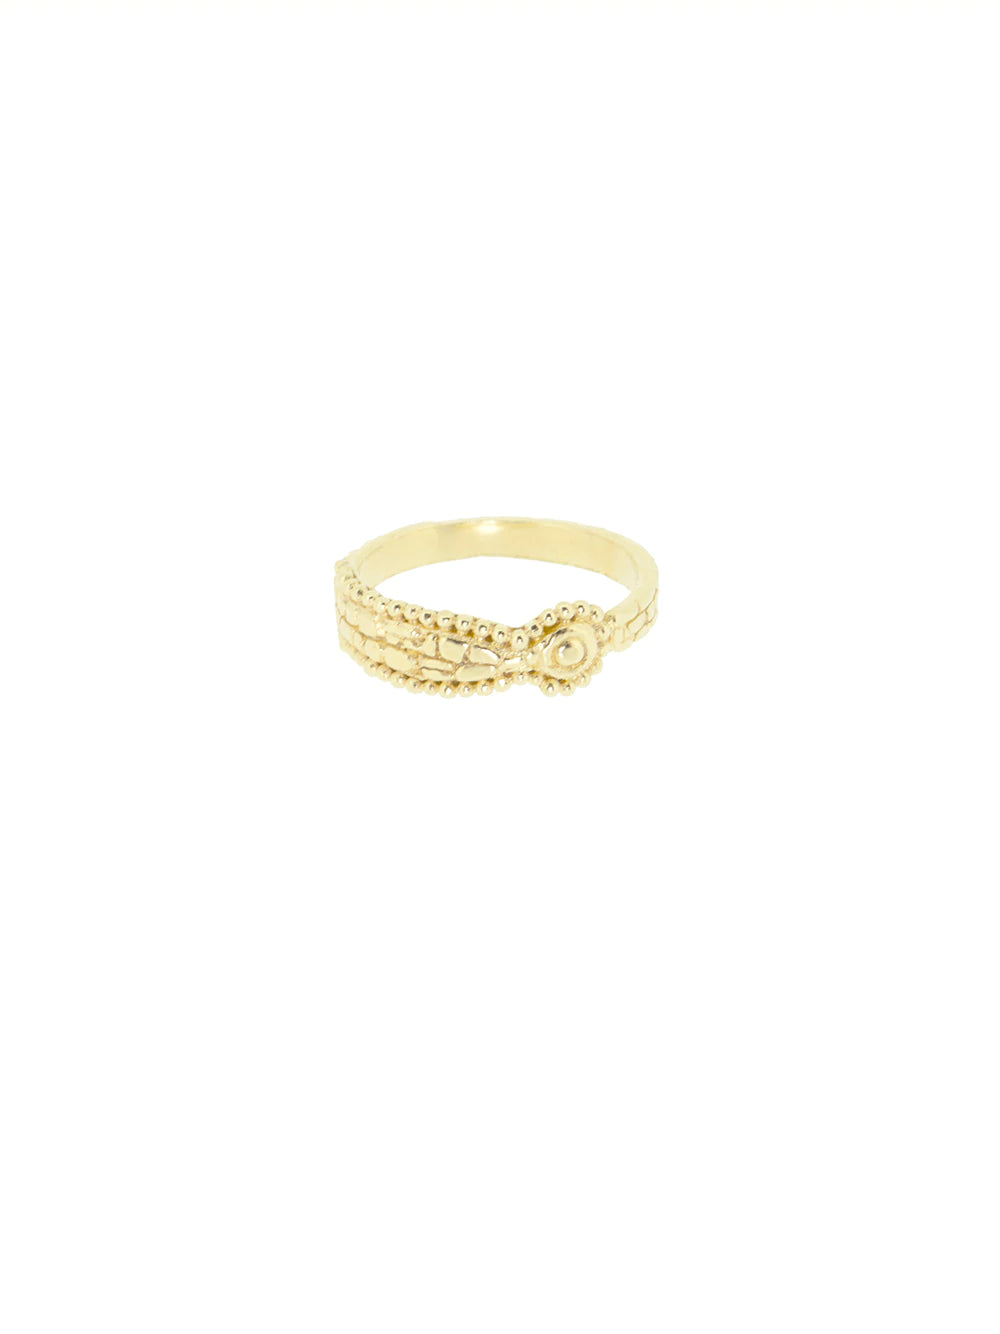 SUN KISSED Ring | Goldplated